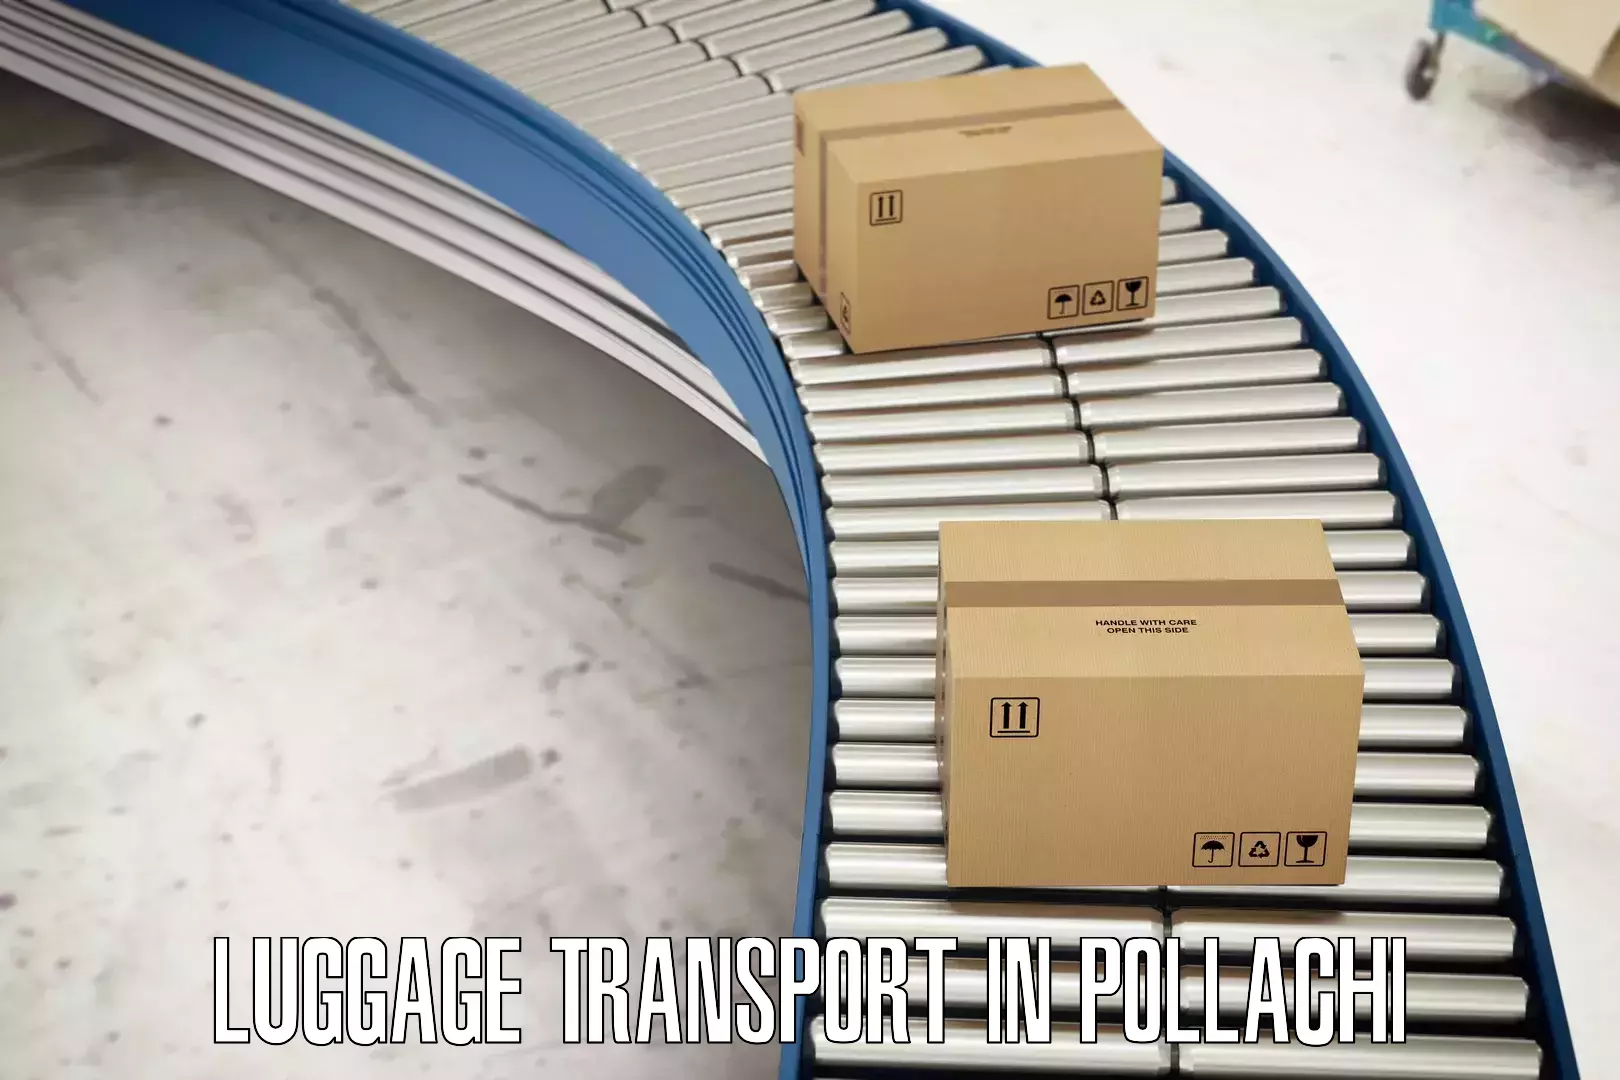 Luggage transport company in Pollachi